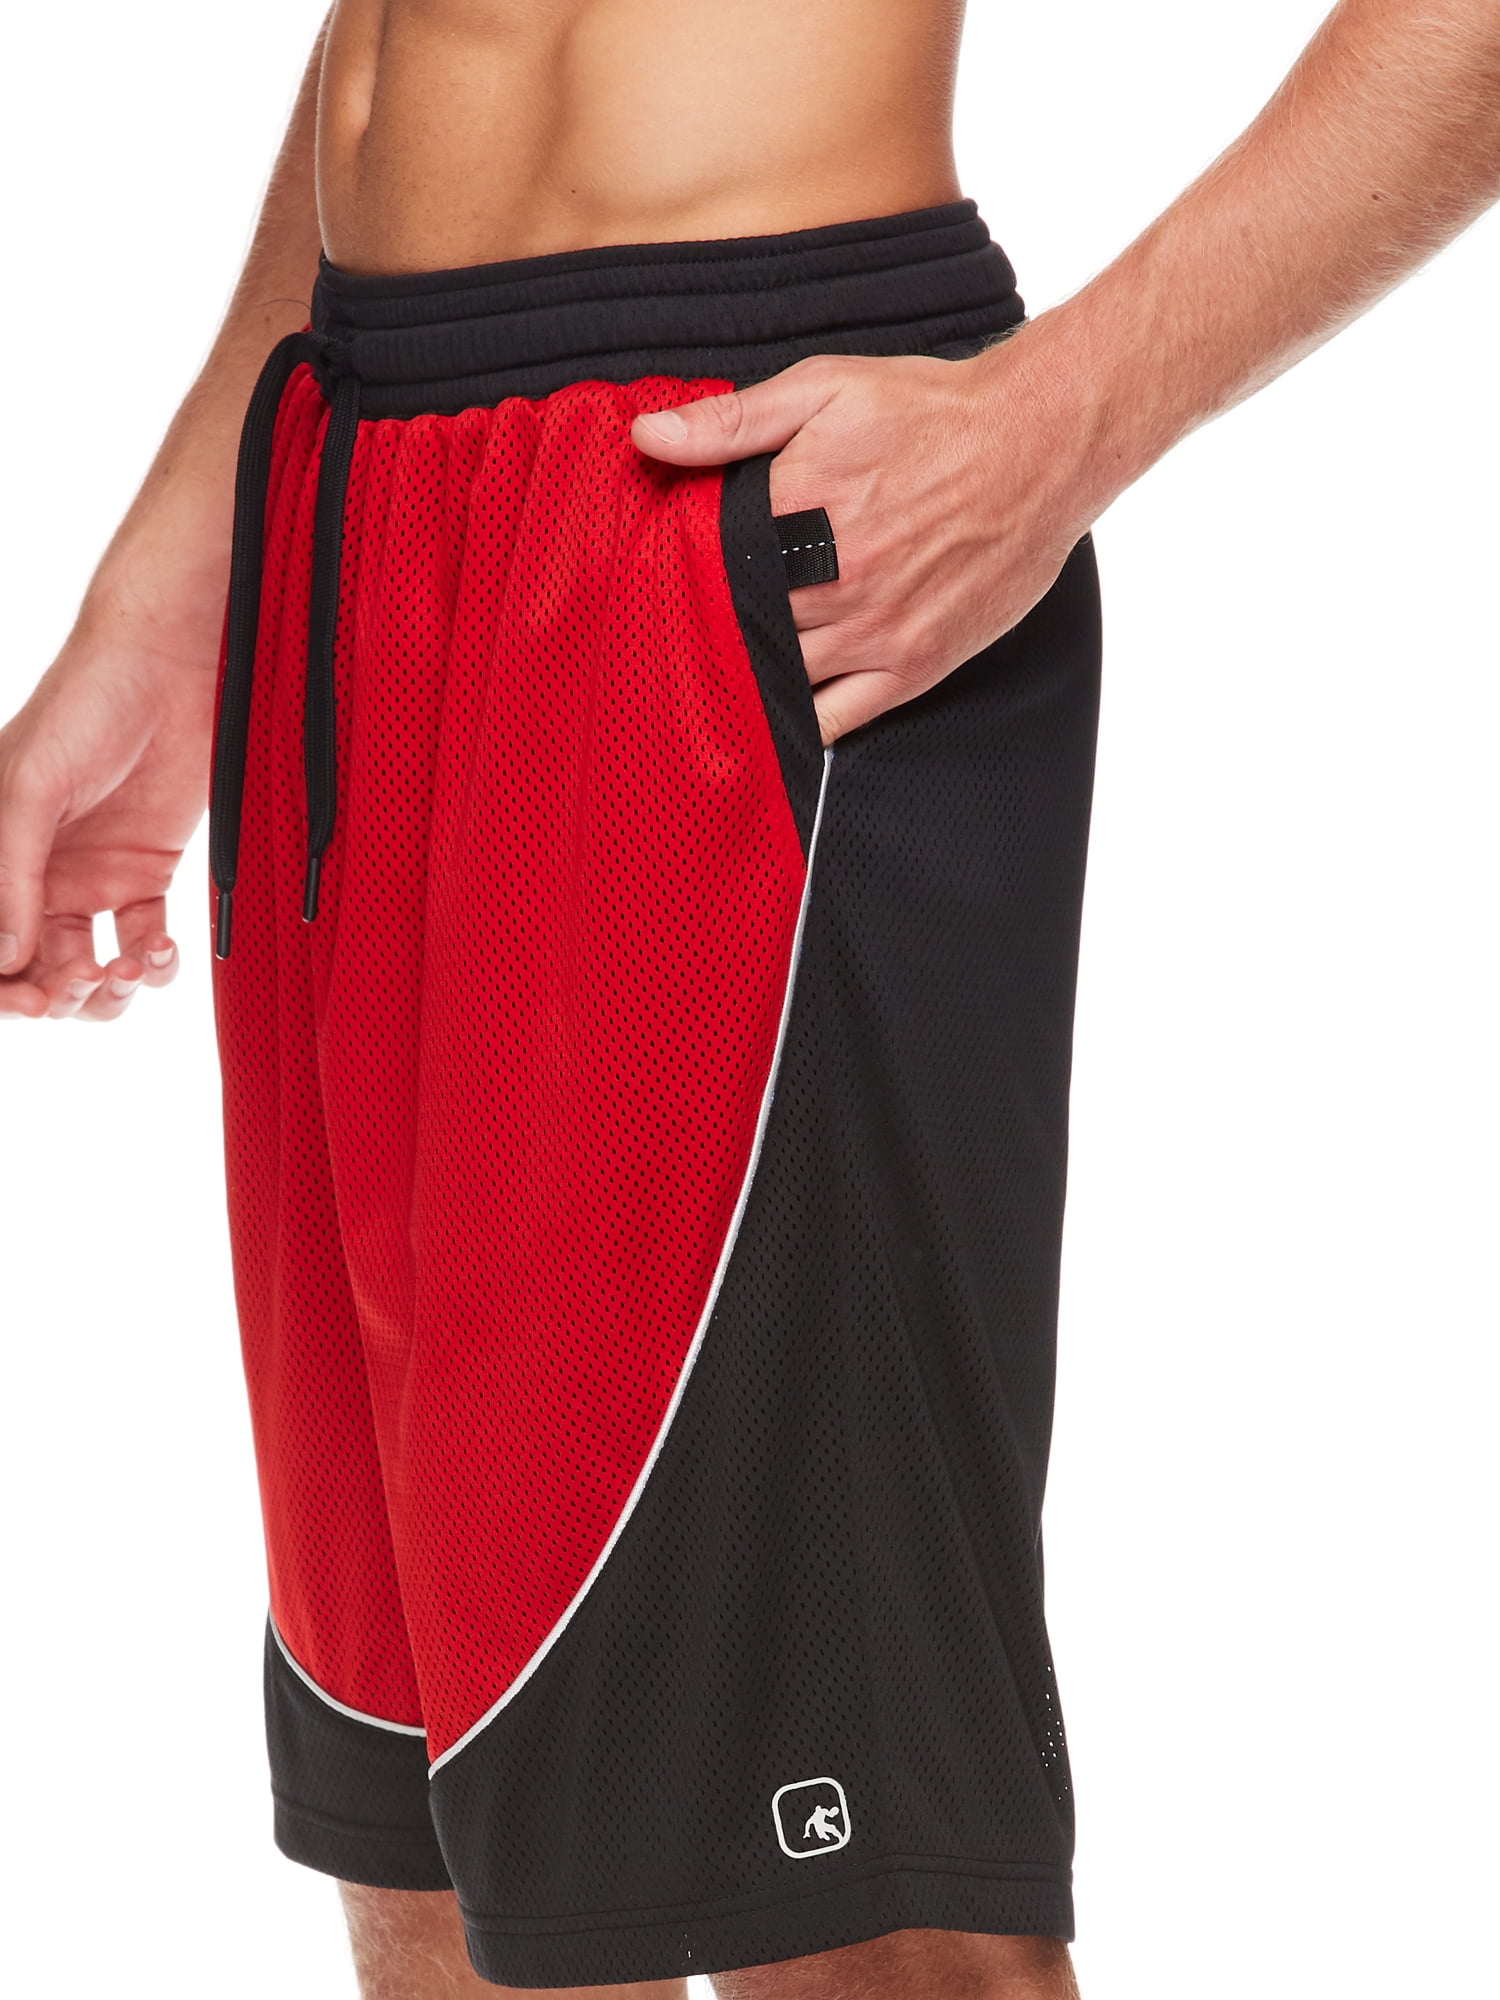 AND1 Men's 11 Crossover Dribble Basketball Shorts, up to 5XL